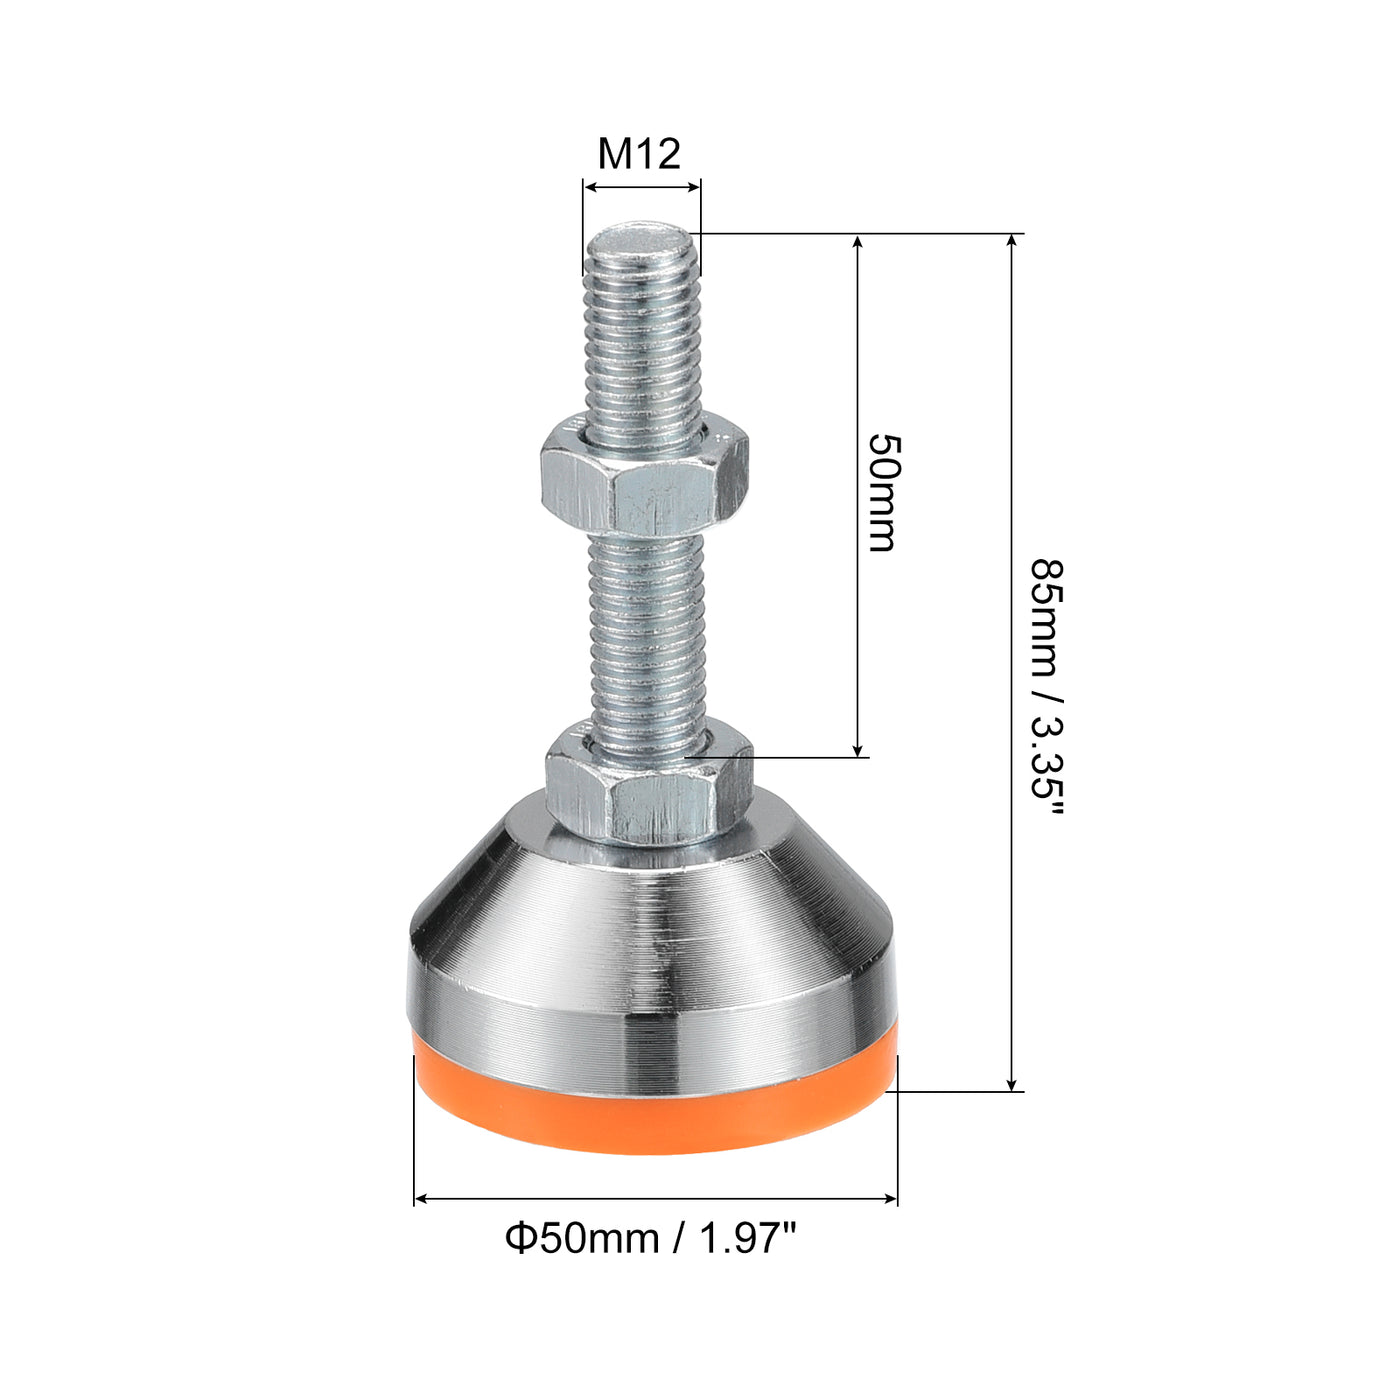 uxcell Uxcell Leveling Feet, 2Pcs M12x50x50mm - Carbon Steel Non-Skid Anti-shock Adjustable Table Feet, Leveling Screw Leg for Furniture Workshops Equipment